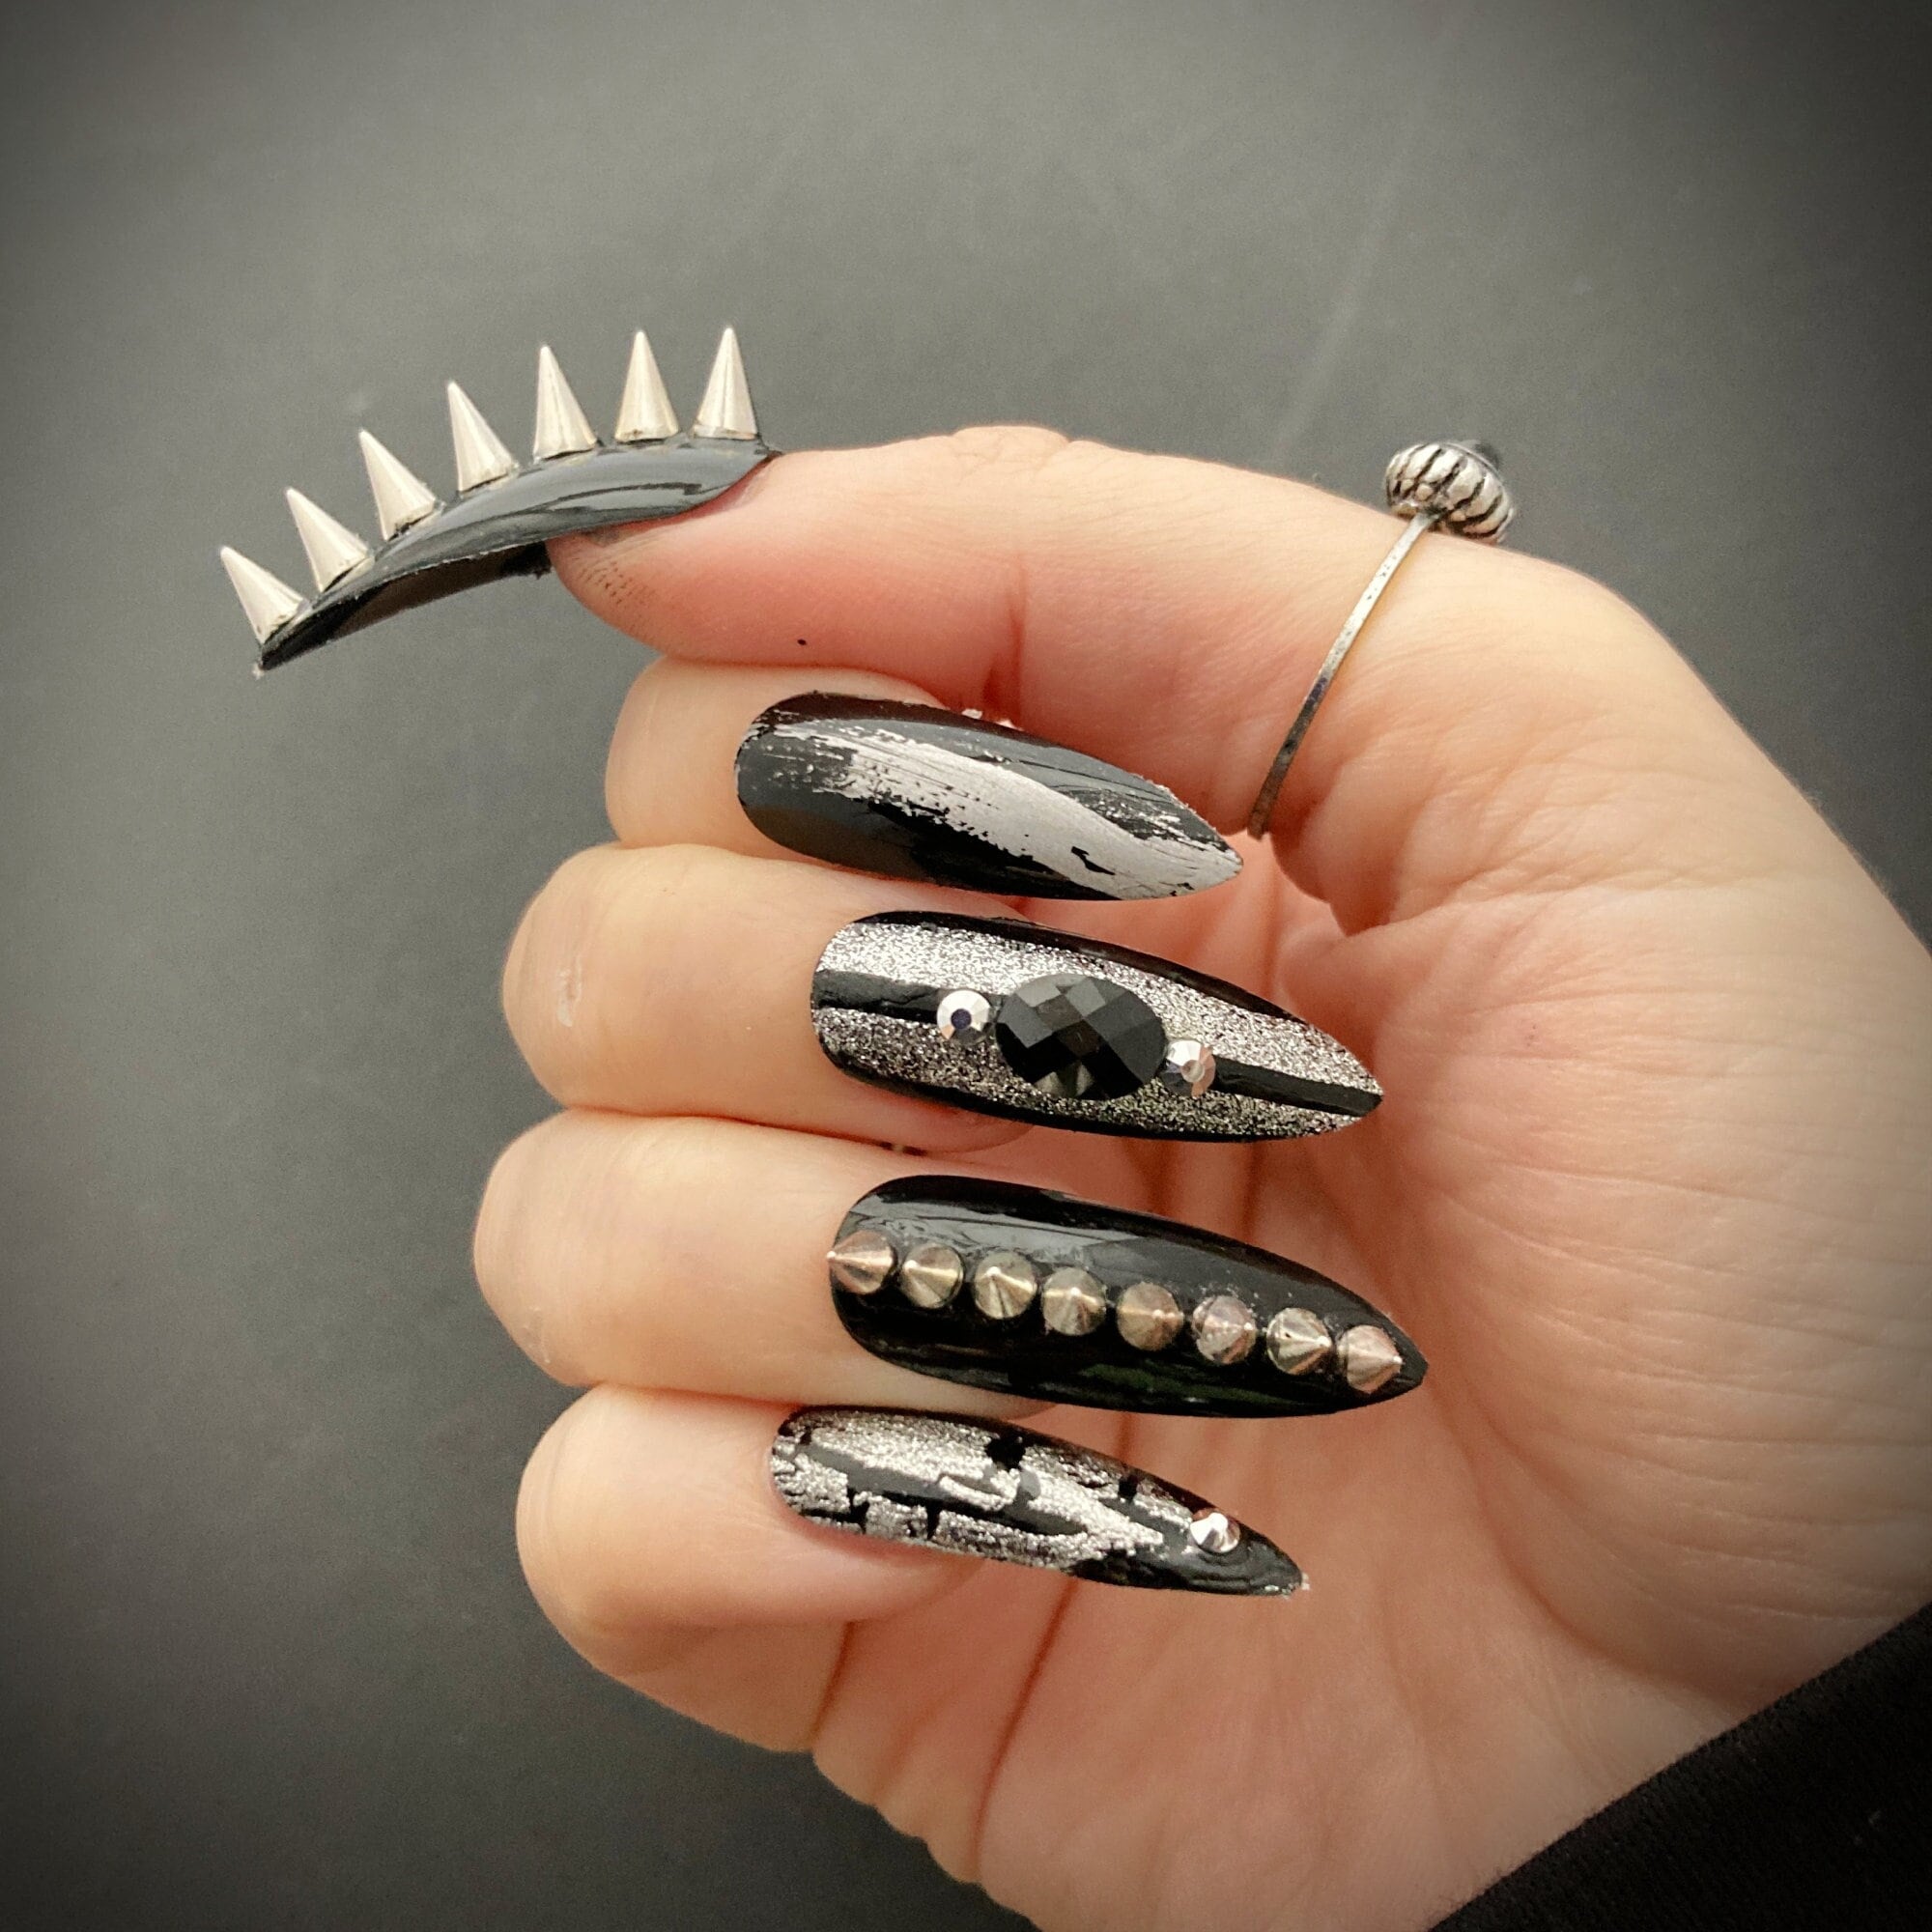 D-GROEE 10Pcs Halloween Costume False Nails Claw Gloves Long Fake Nail Tips  Full Cover Nail Art Arrow Claw Halloween Prop Decor Party Witch Claw Paw  Gloves for Women Men Cat Finger Nail